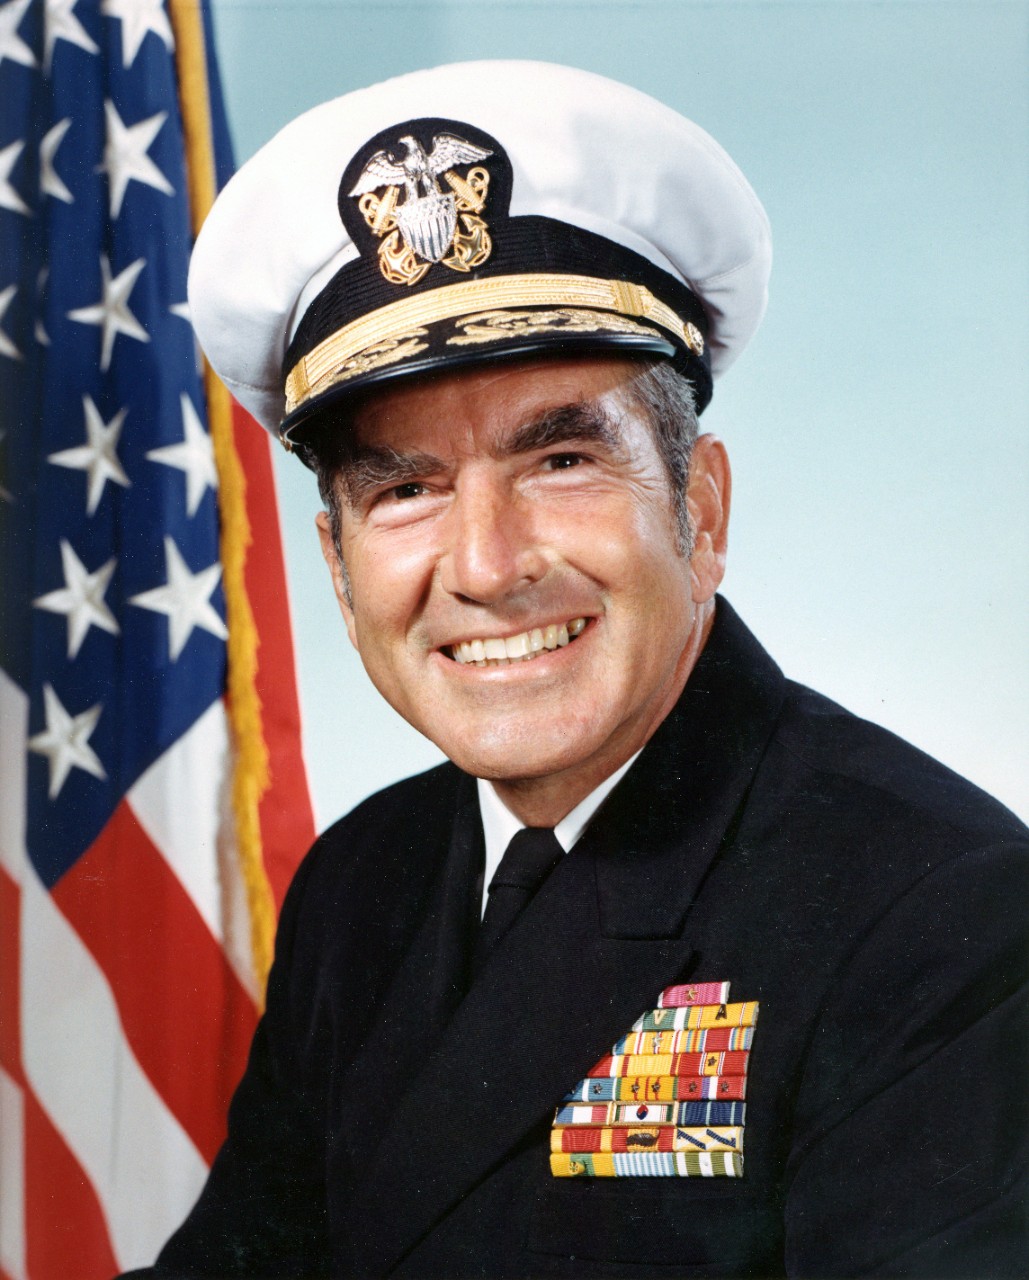 Admiral Elmo R. Zumwalt, Jr., USN, Chief of Naval Operations. Portrait photograph, taken in August 1970 by PHC W. Mason. Official U.S. Navy Photograph, from the collections of the Naval History and Heritage Command.